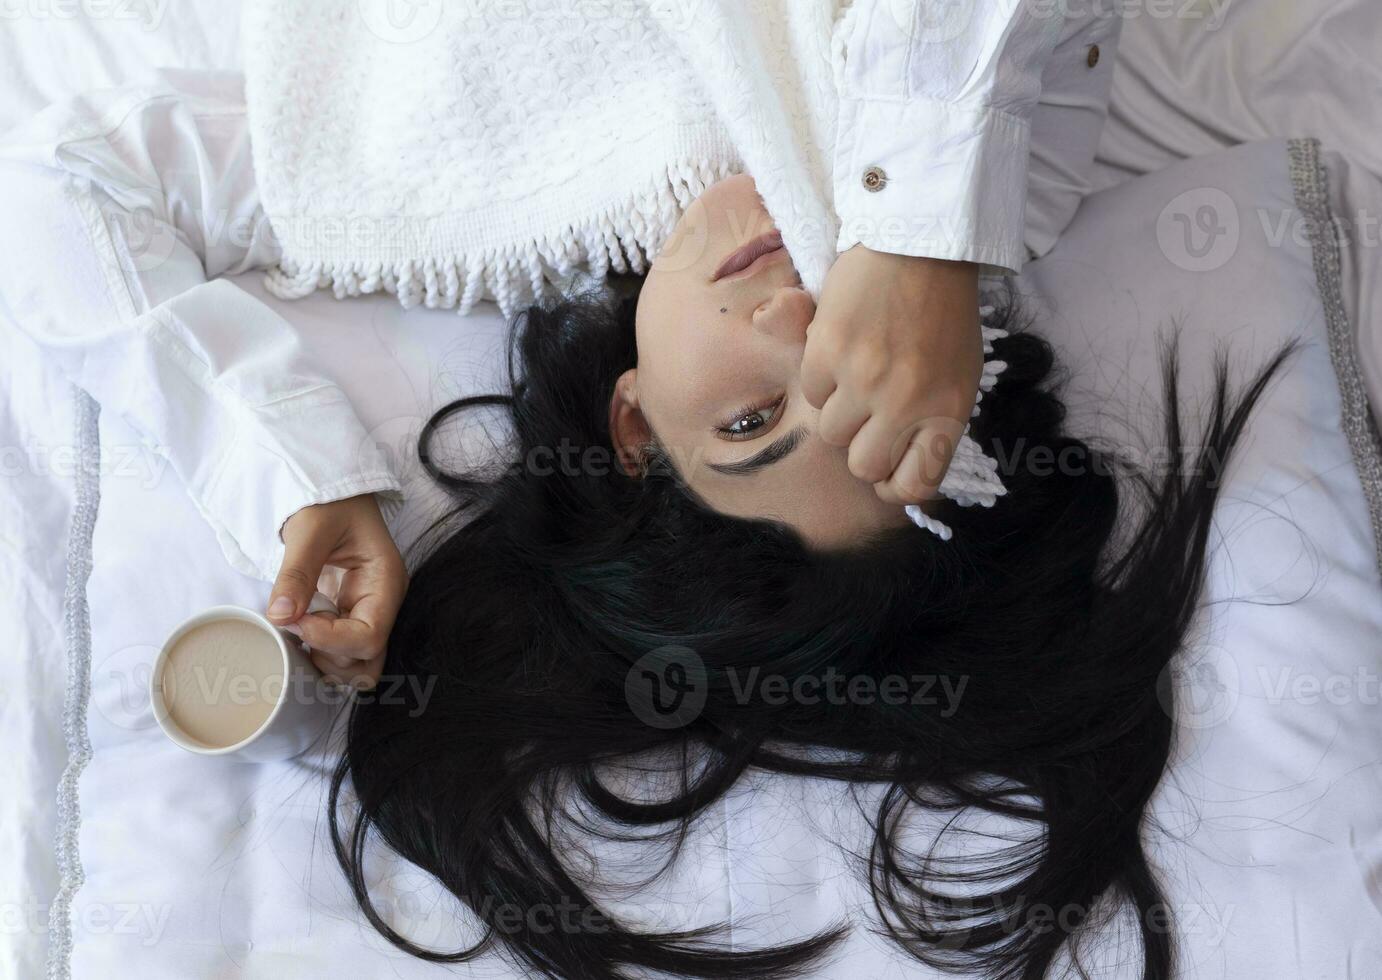 Beauty woman waking up in morning and drinking coffee in bed. Young beautiful woman in bed hiding her face with plaid and holding cup of coffee. Cute lady waking up. Breakfast in a cozy bedroom photo